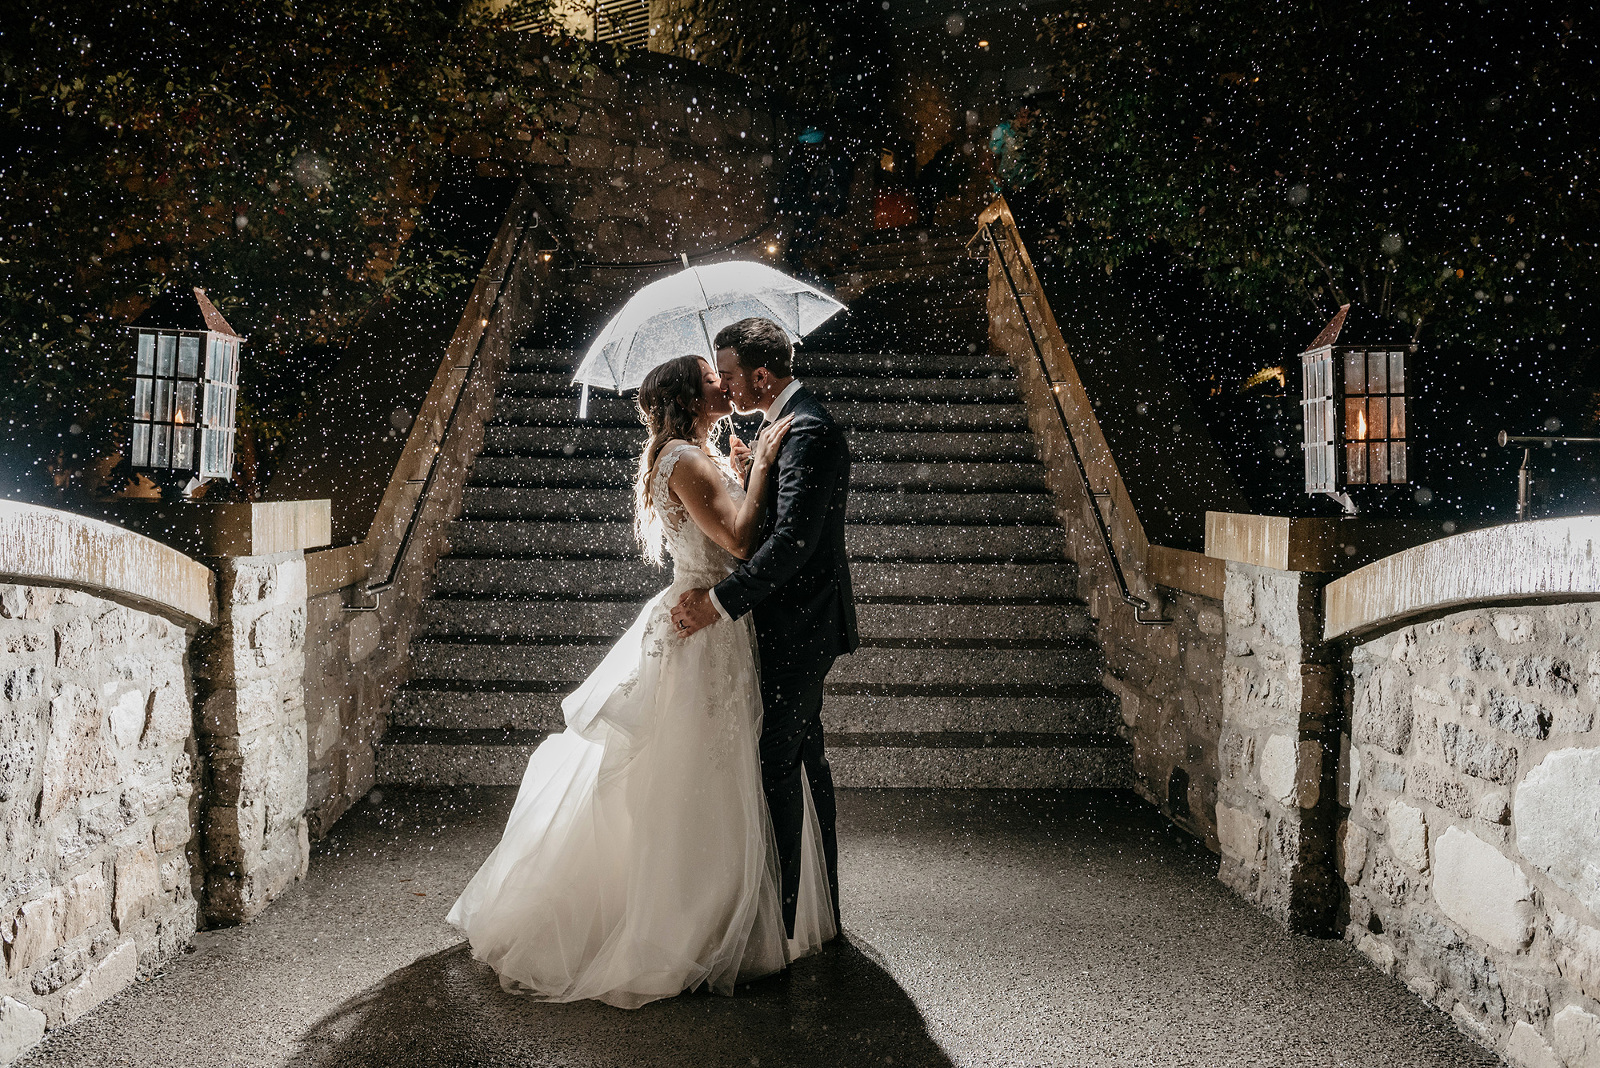 Bride and groom kiss under an umbrella in the rain at night at Ancaster Mill, Ontario